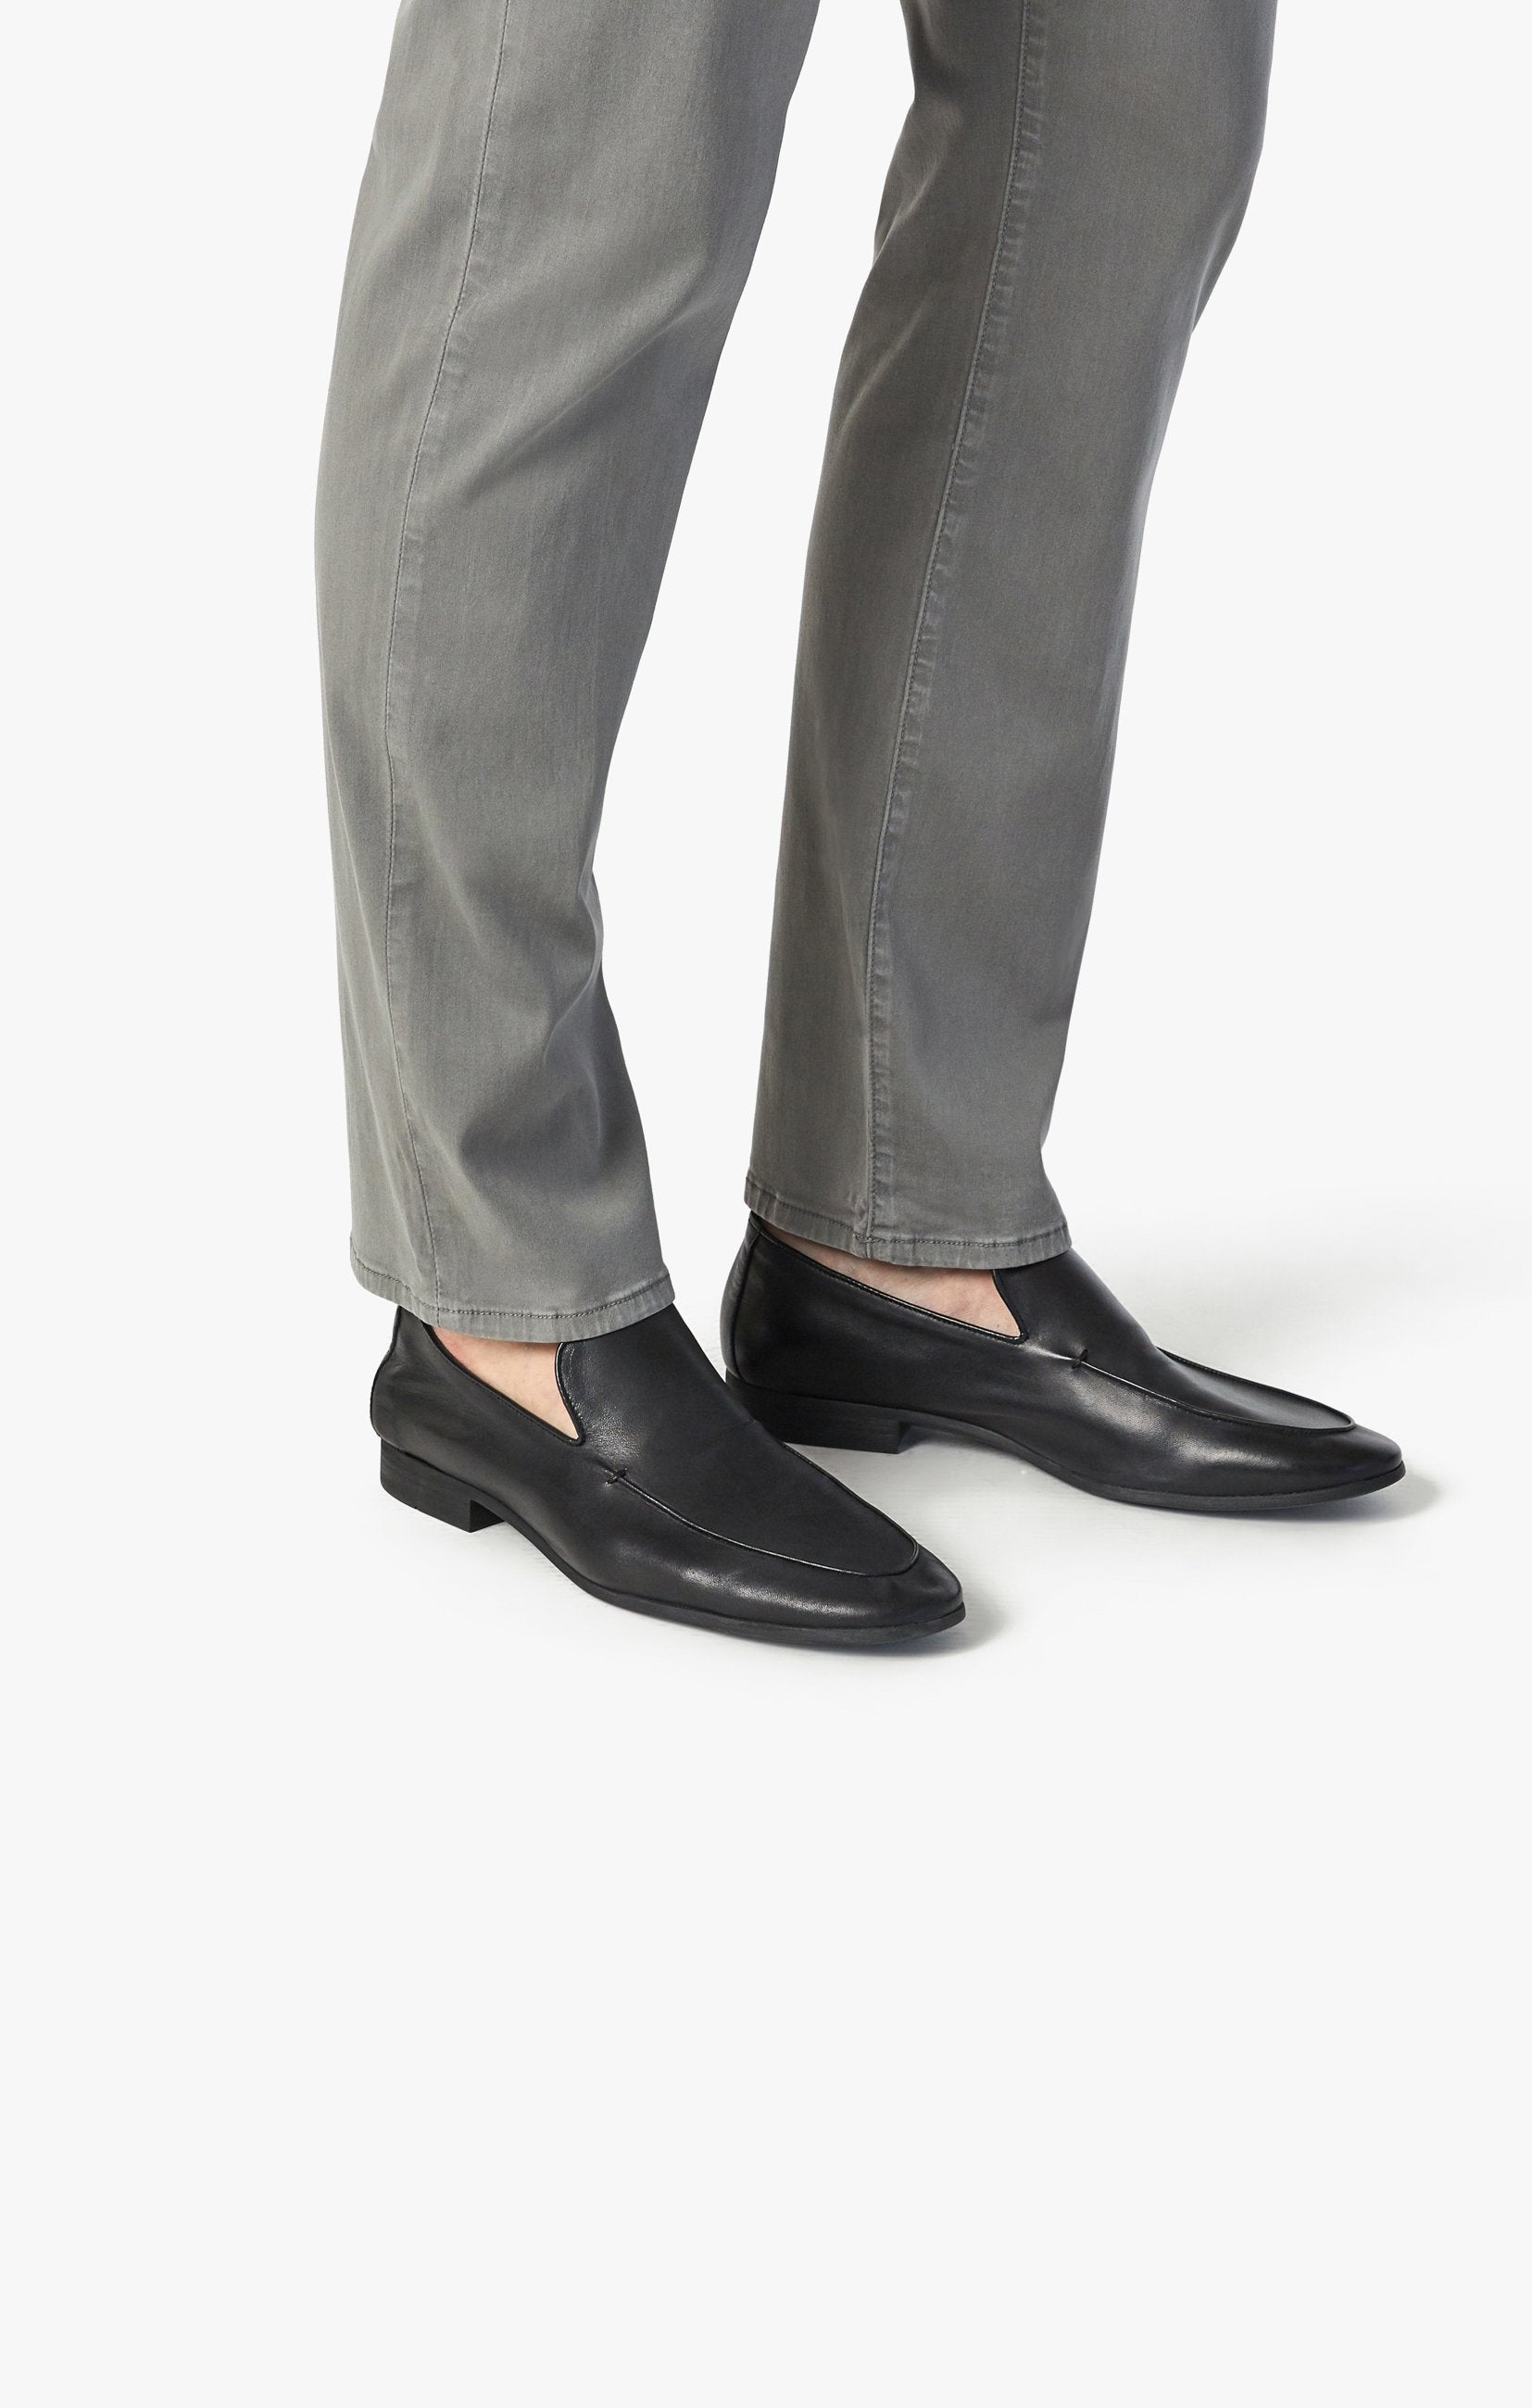 Charisma Relaxed Straight Pants In Pewter Twill